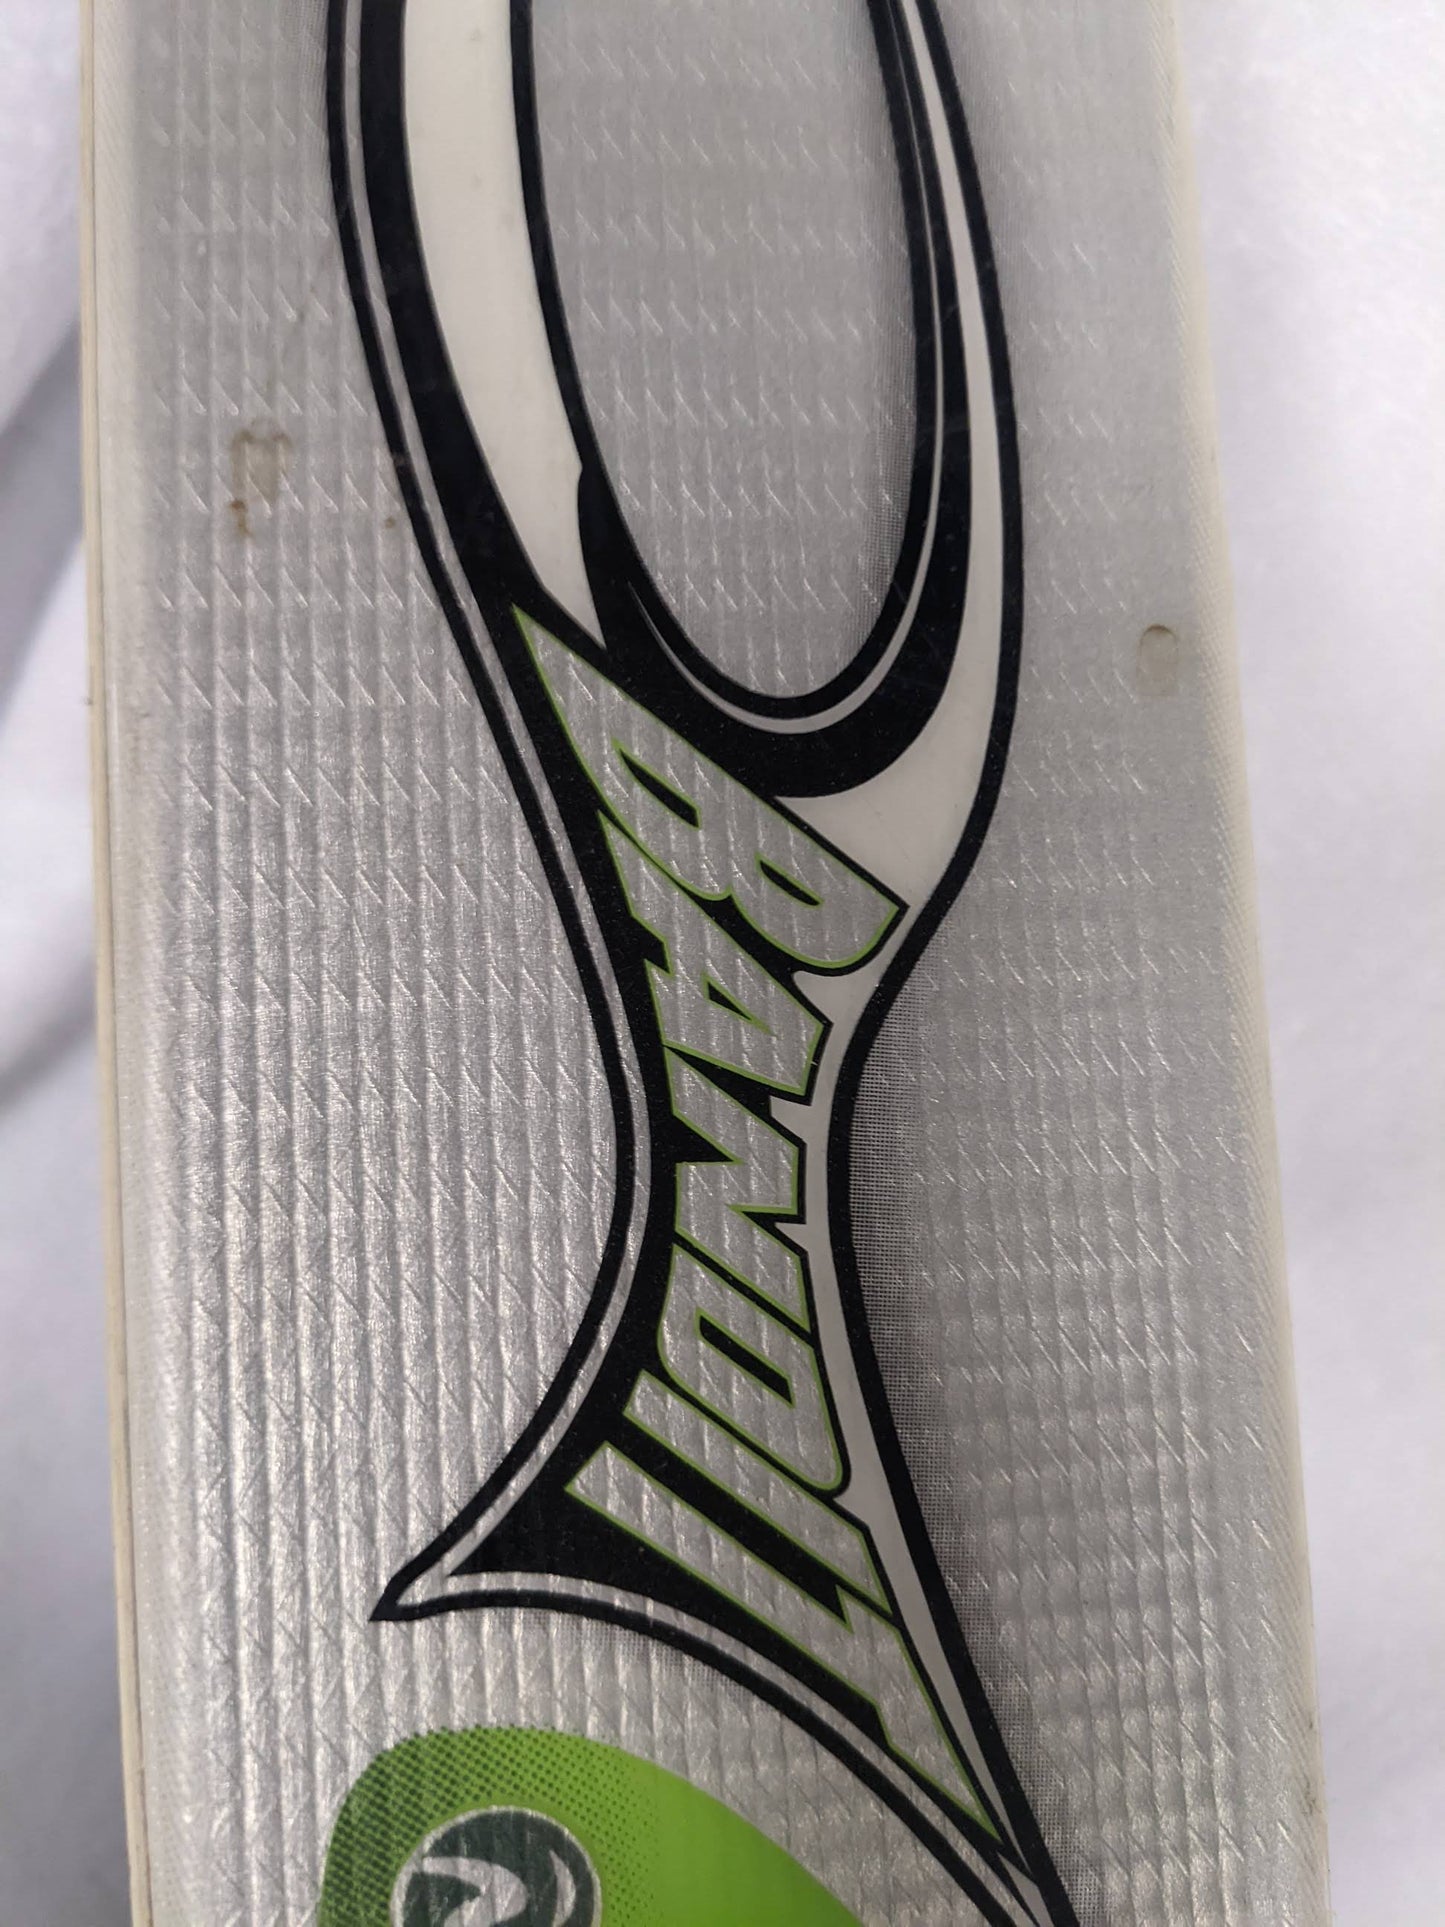 Rossignol B4 95 Bandit Skis w/Tyrolia Bindings Size 195 Cm Color Green Condition Used